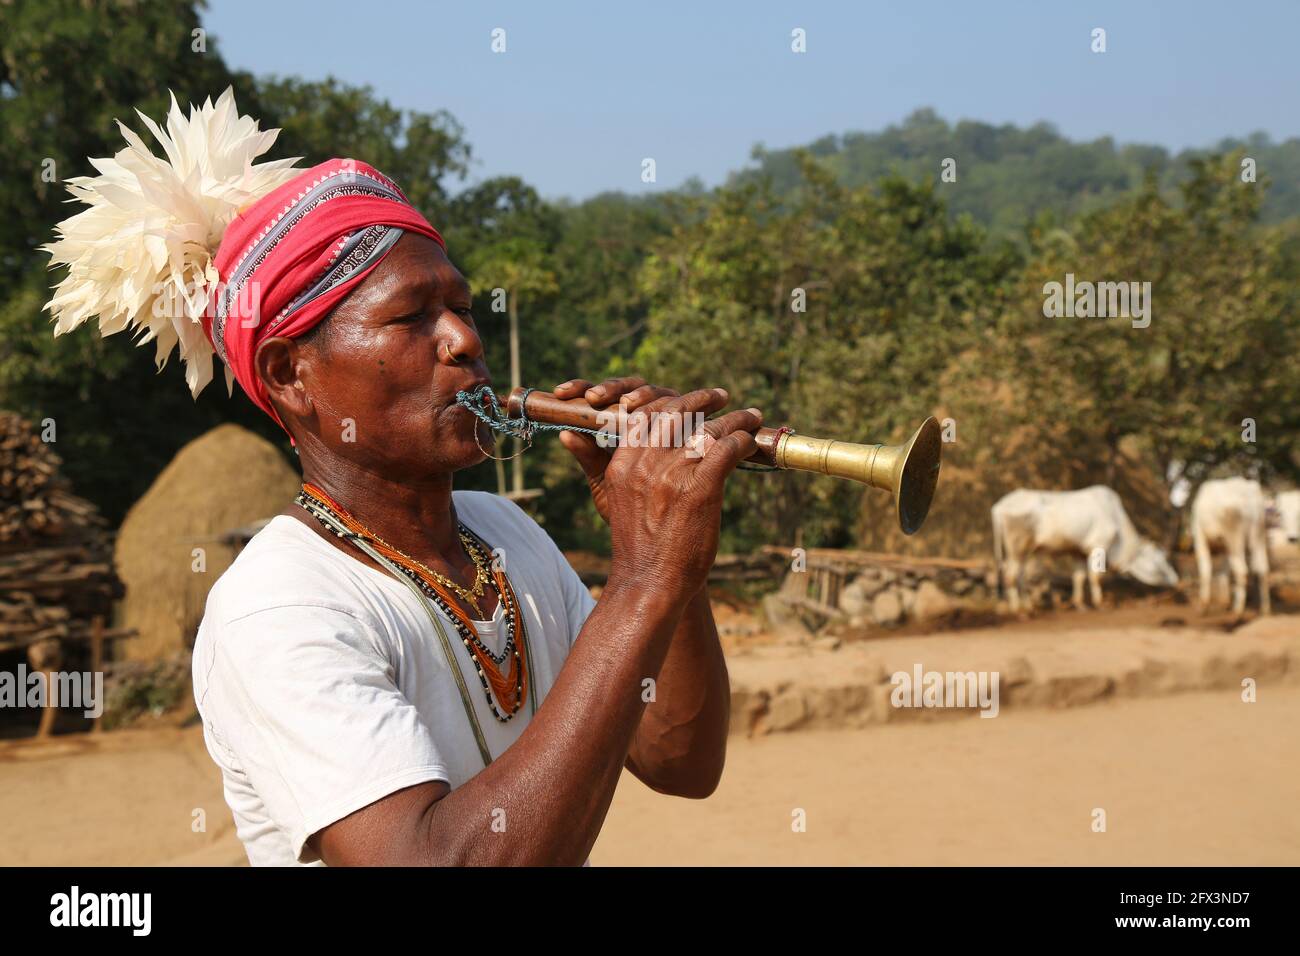 LANJIA SAORA TRIBE - Lanjia Saora piper using Turi a traditional musical instrument. He is wearing white fowl feathers on his head. Puttasingh village Stock Photo